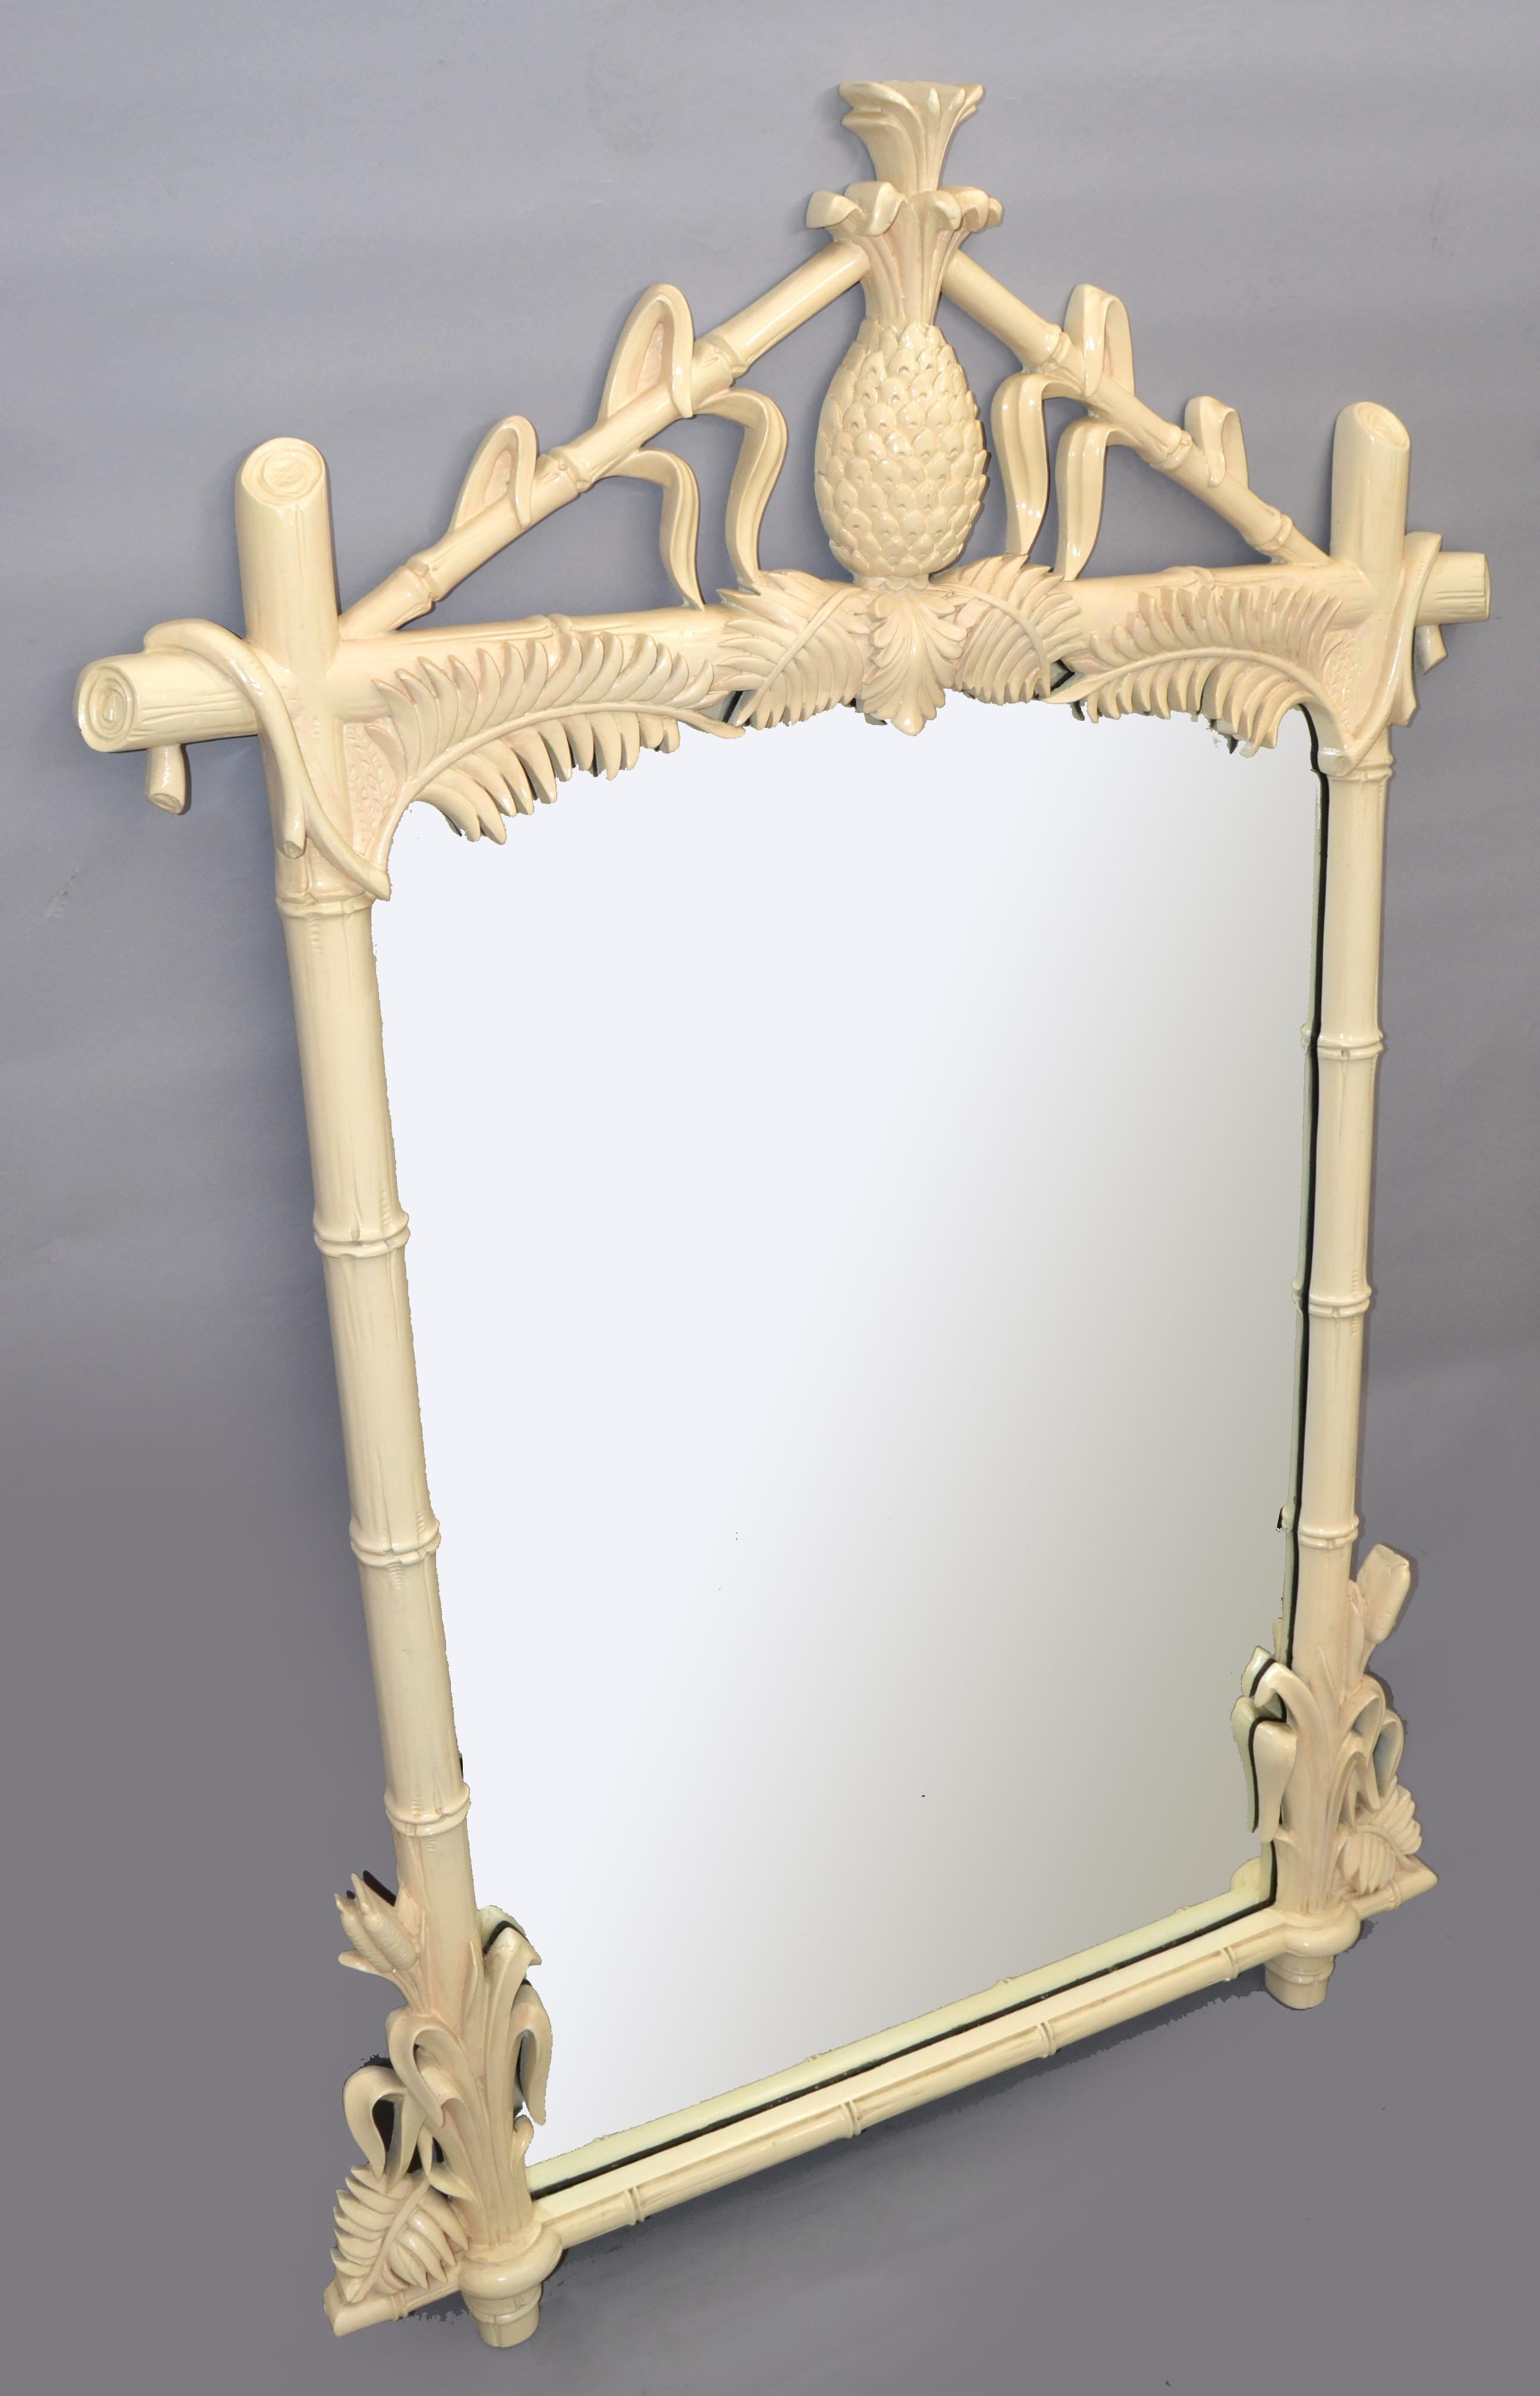 1970s Hollywood Regency Faux-Bois antique Taupe hand carved wood wall mirror with Pineapple design made in Italy for Gampel-Stoll.
Heavy Gothic style shape and it can be securely hung.
In original very good vintage condition.
Mirror size: 26 x 40